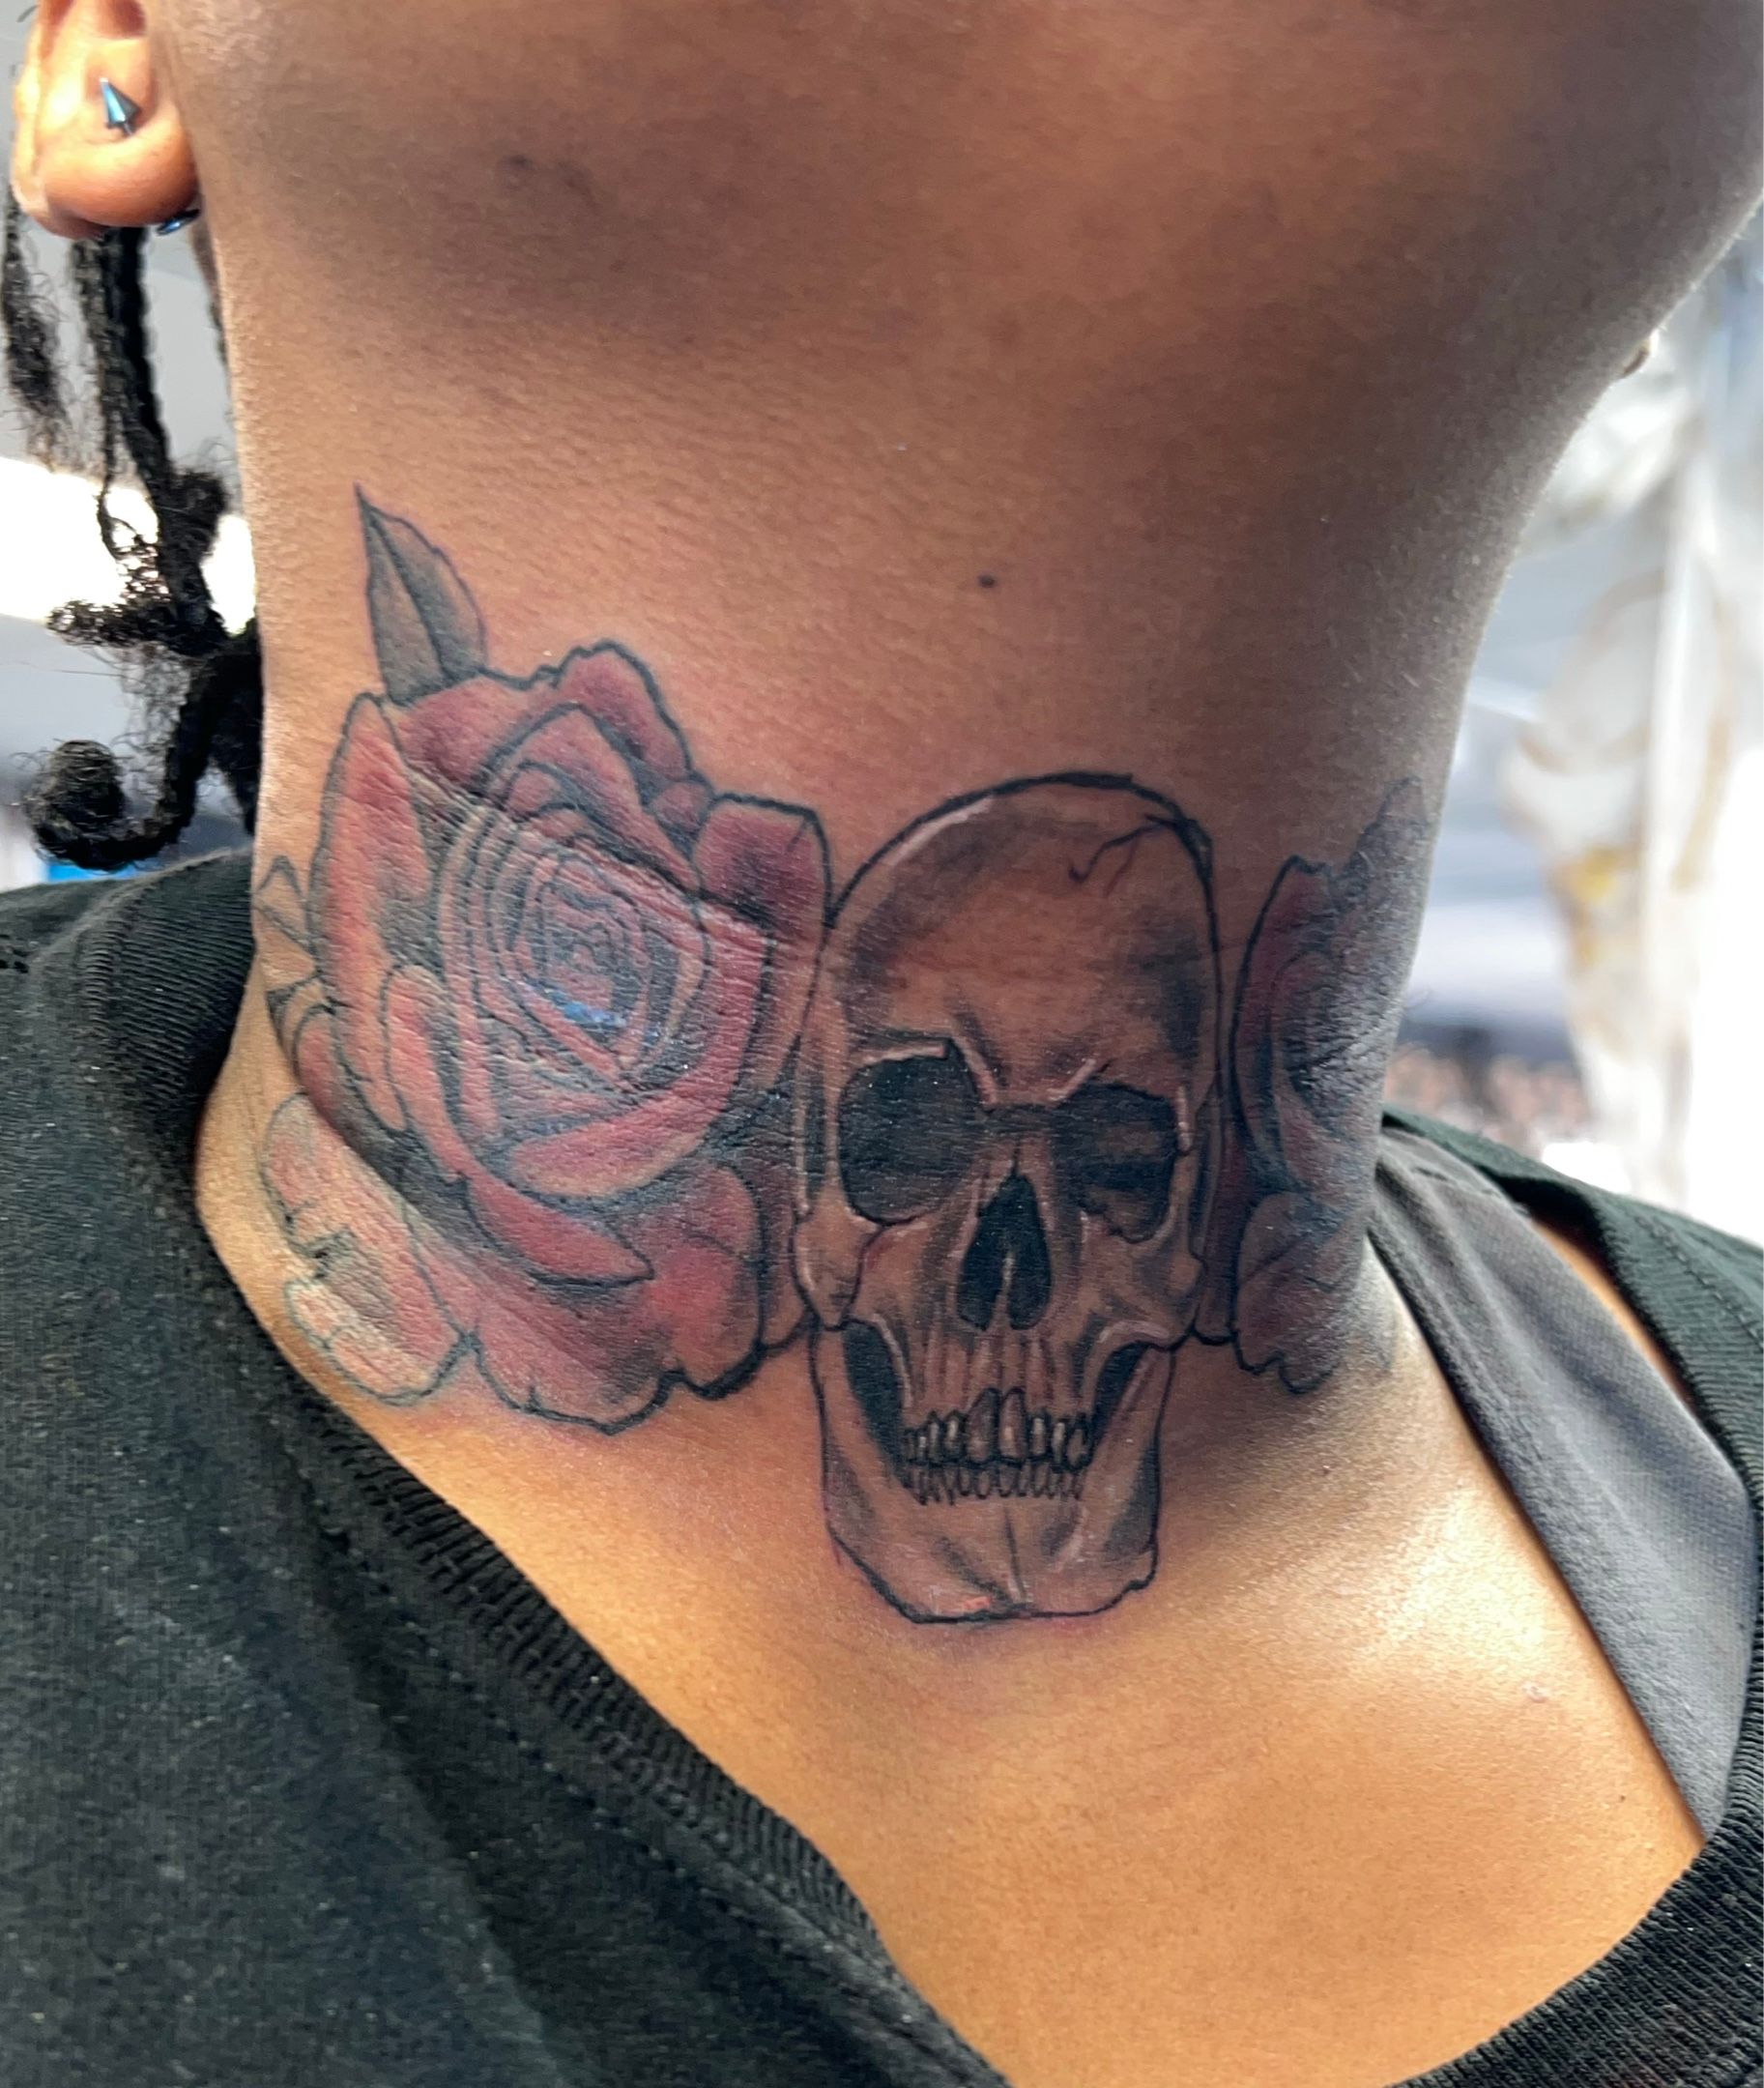 Tattoo uploaded by Axe • Custom skull rose design done in two sittings back  to back. Over 15+ hours of work . For custom work like this please send me  some info